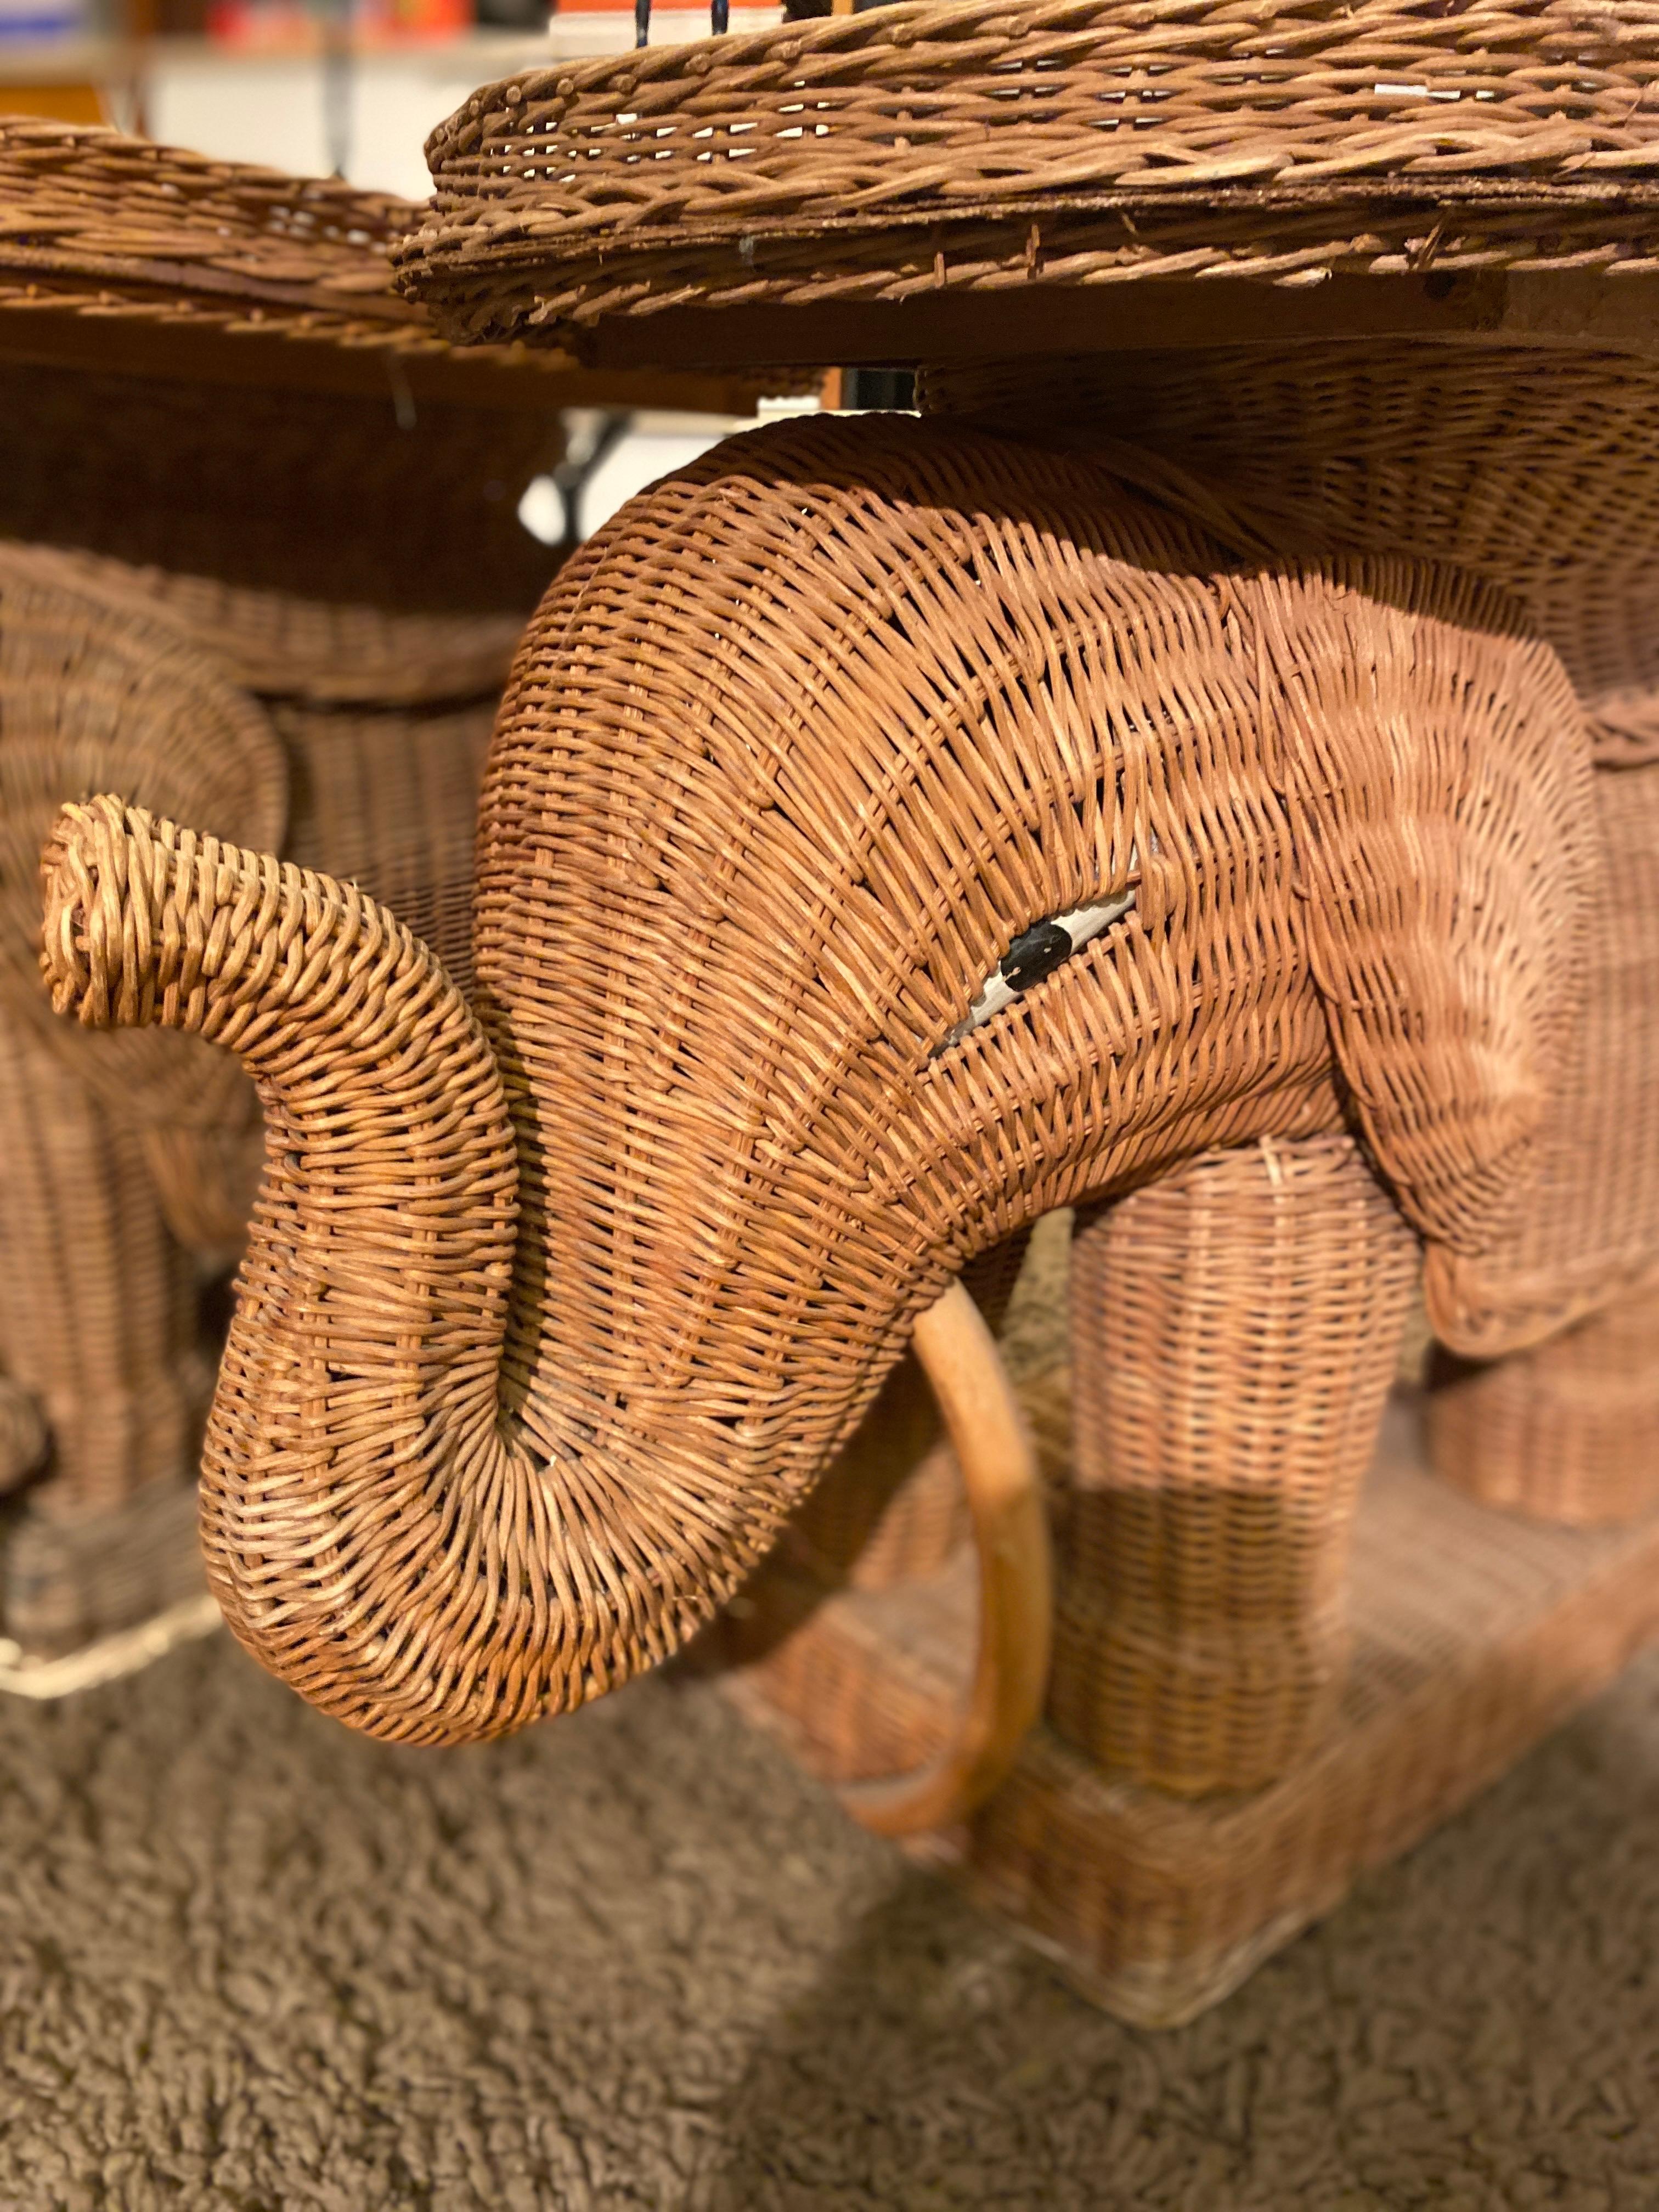 Mid-Century Modern Pair of Elephant Shaped Wicker Sofa Ends, 1970 in Vivaï del Sud Style For Sale